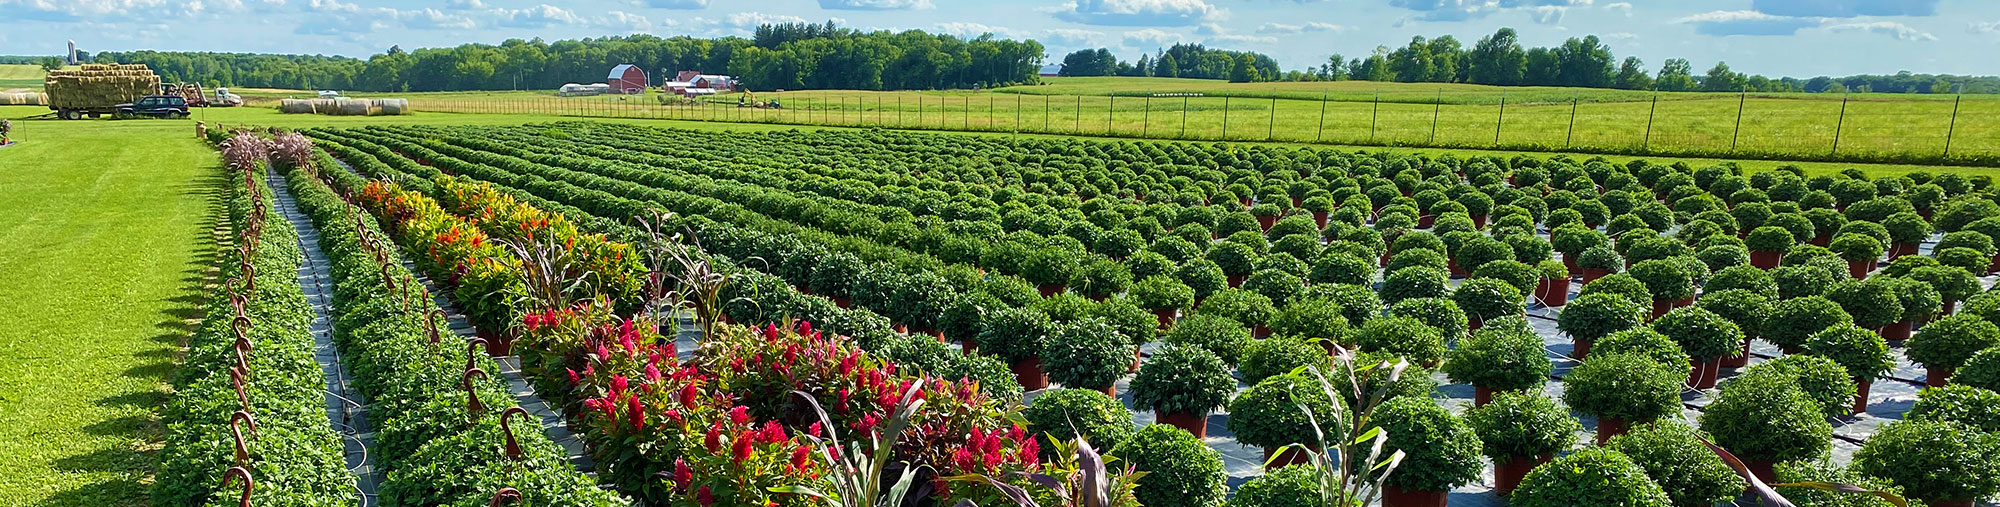 Acres of flowers, houseplants and produce at Turnpike Greenhouse - Granton Wisconsin - flowers, houseplants, vegetables, progressive greenhouse, quality plants, planters, gifts